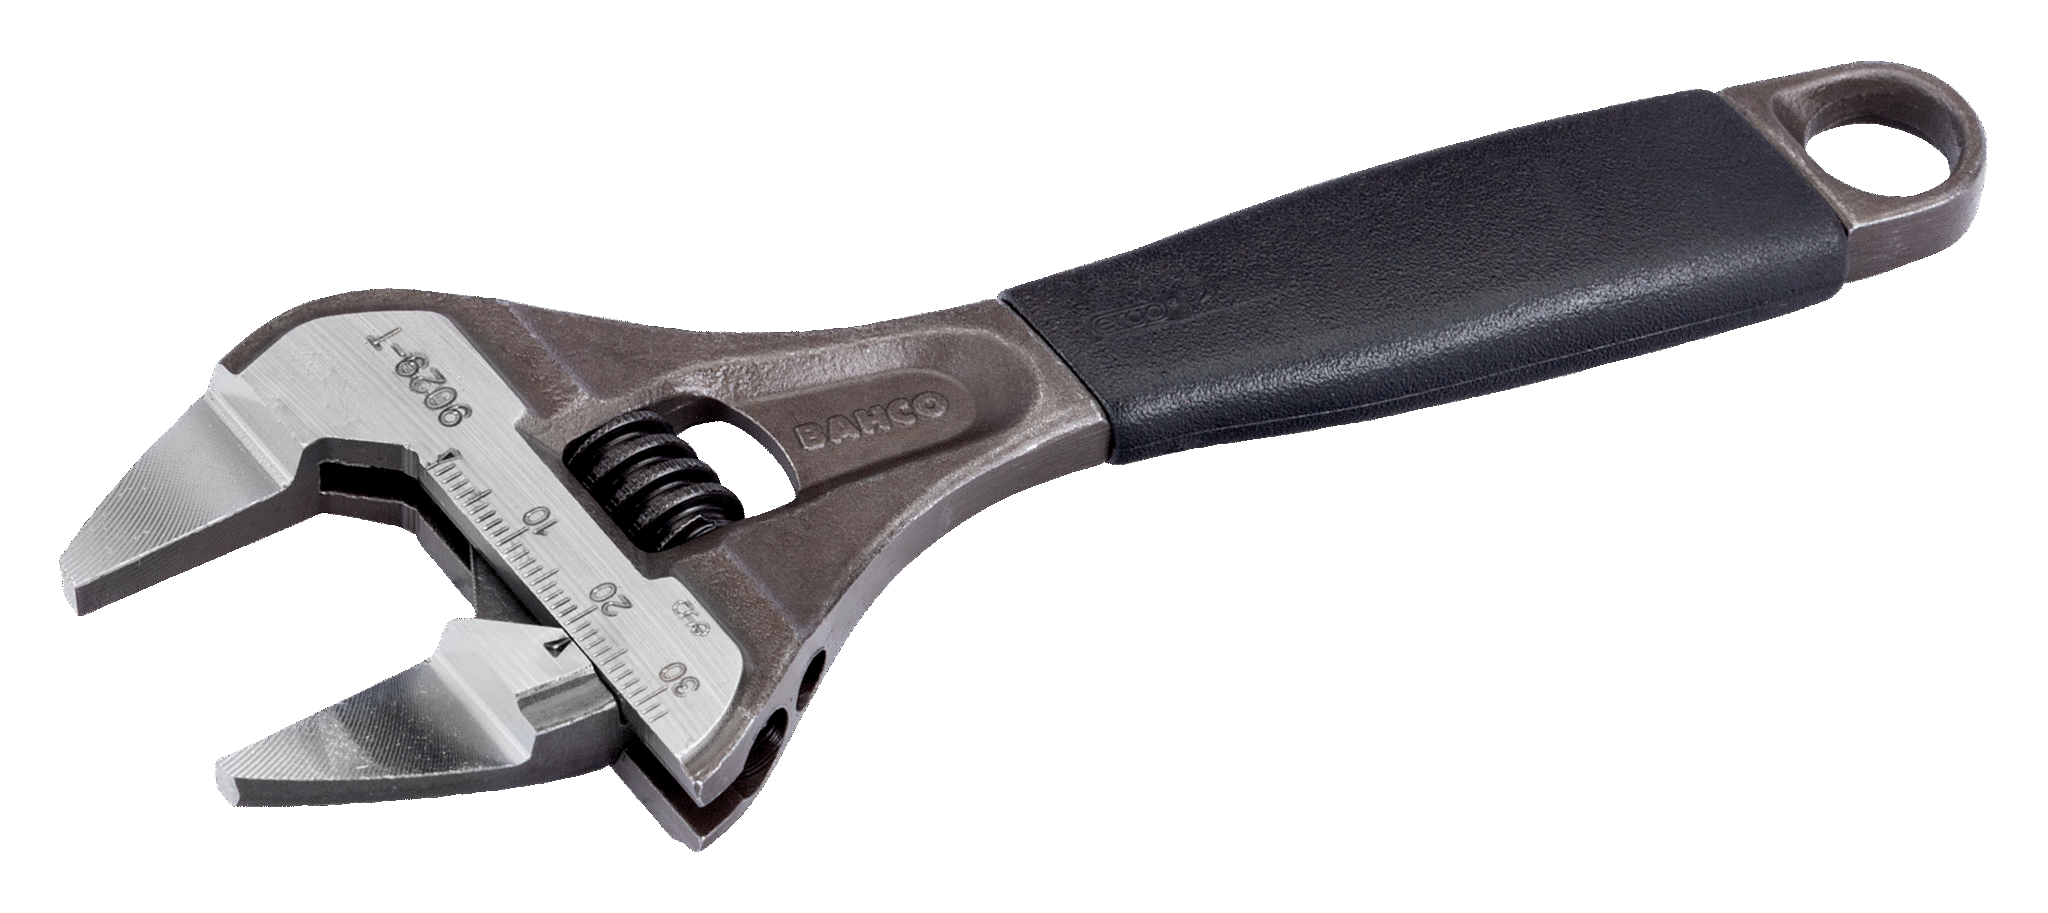 ERGO™ Central Nut Wide Opening Thin Jaw Adjustable Wrenches with Rubber Handle - 9031-T by Bahco